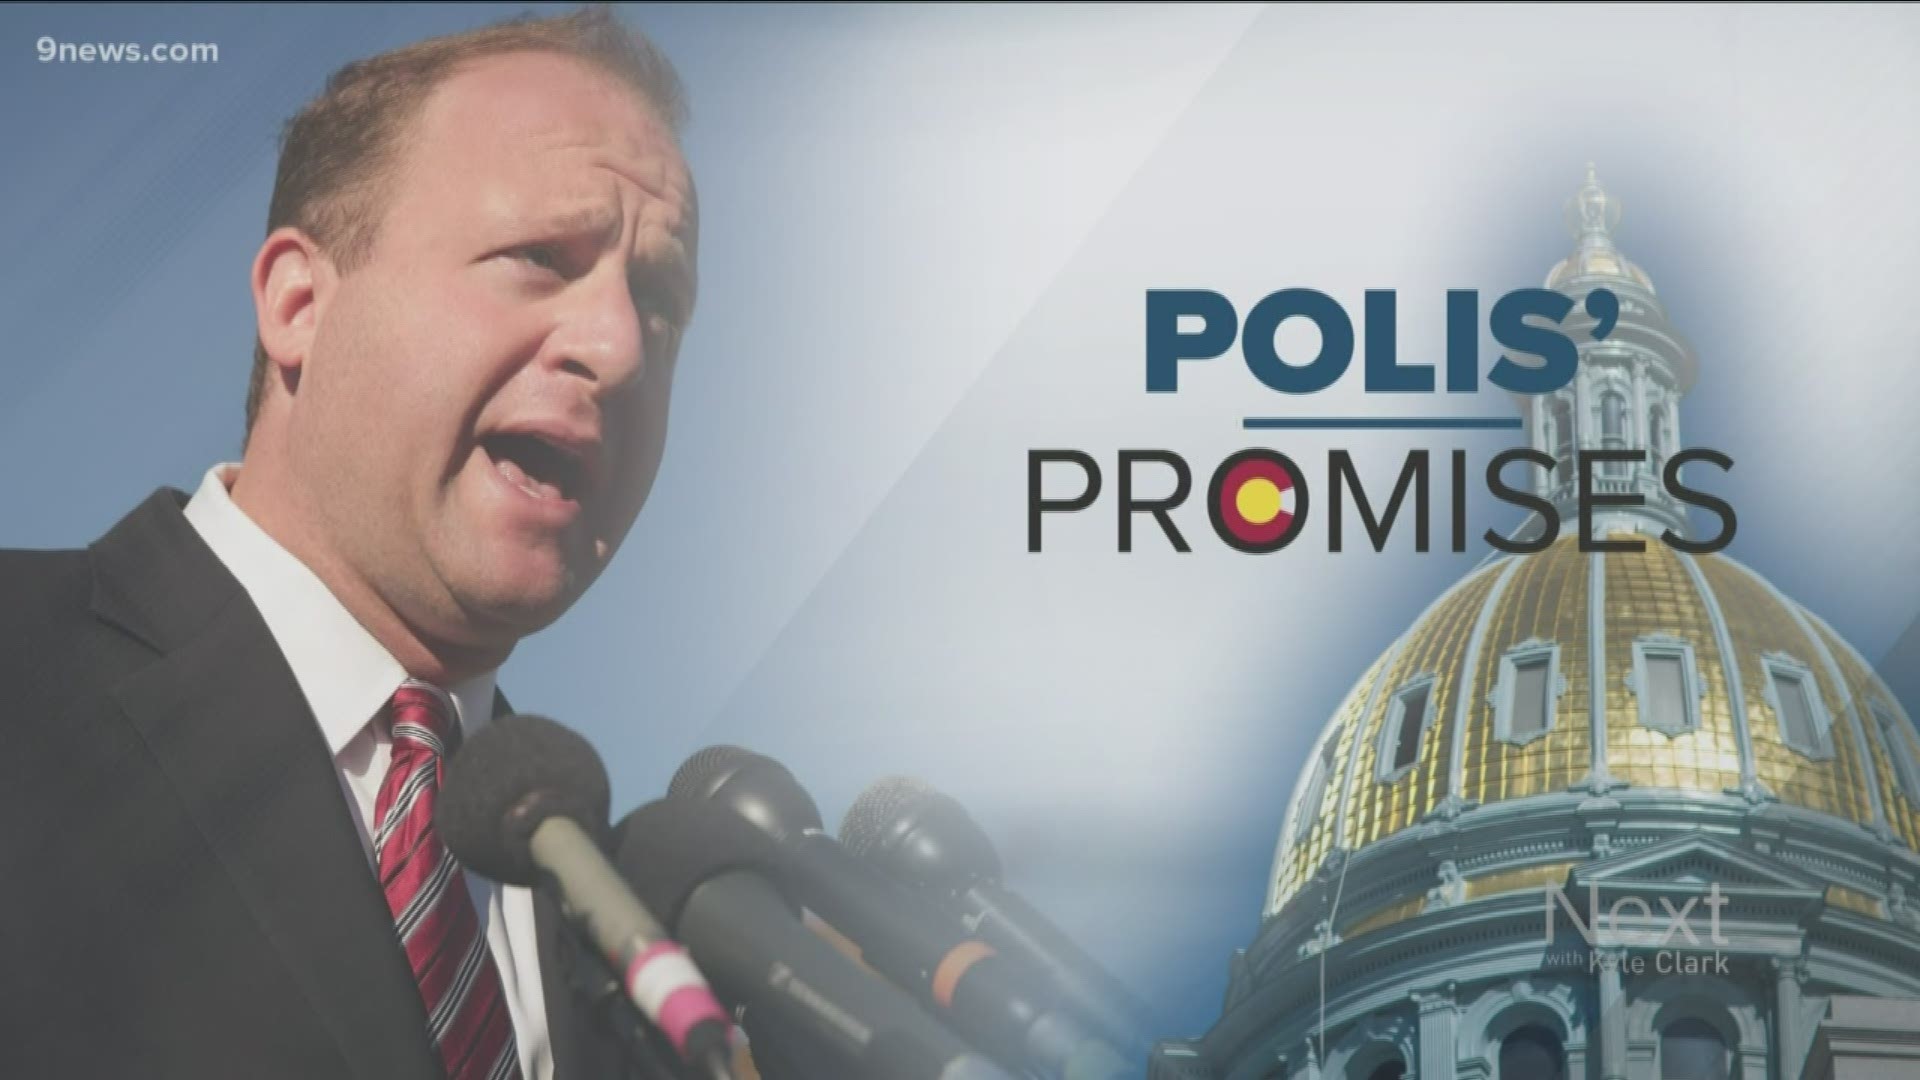 Time to check in on the campaign promises made by Democratic Governor Jared Polis. He's giving his second State of the State address on Thursday.